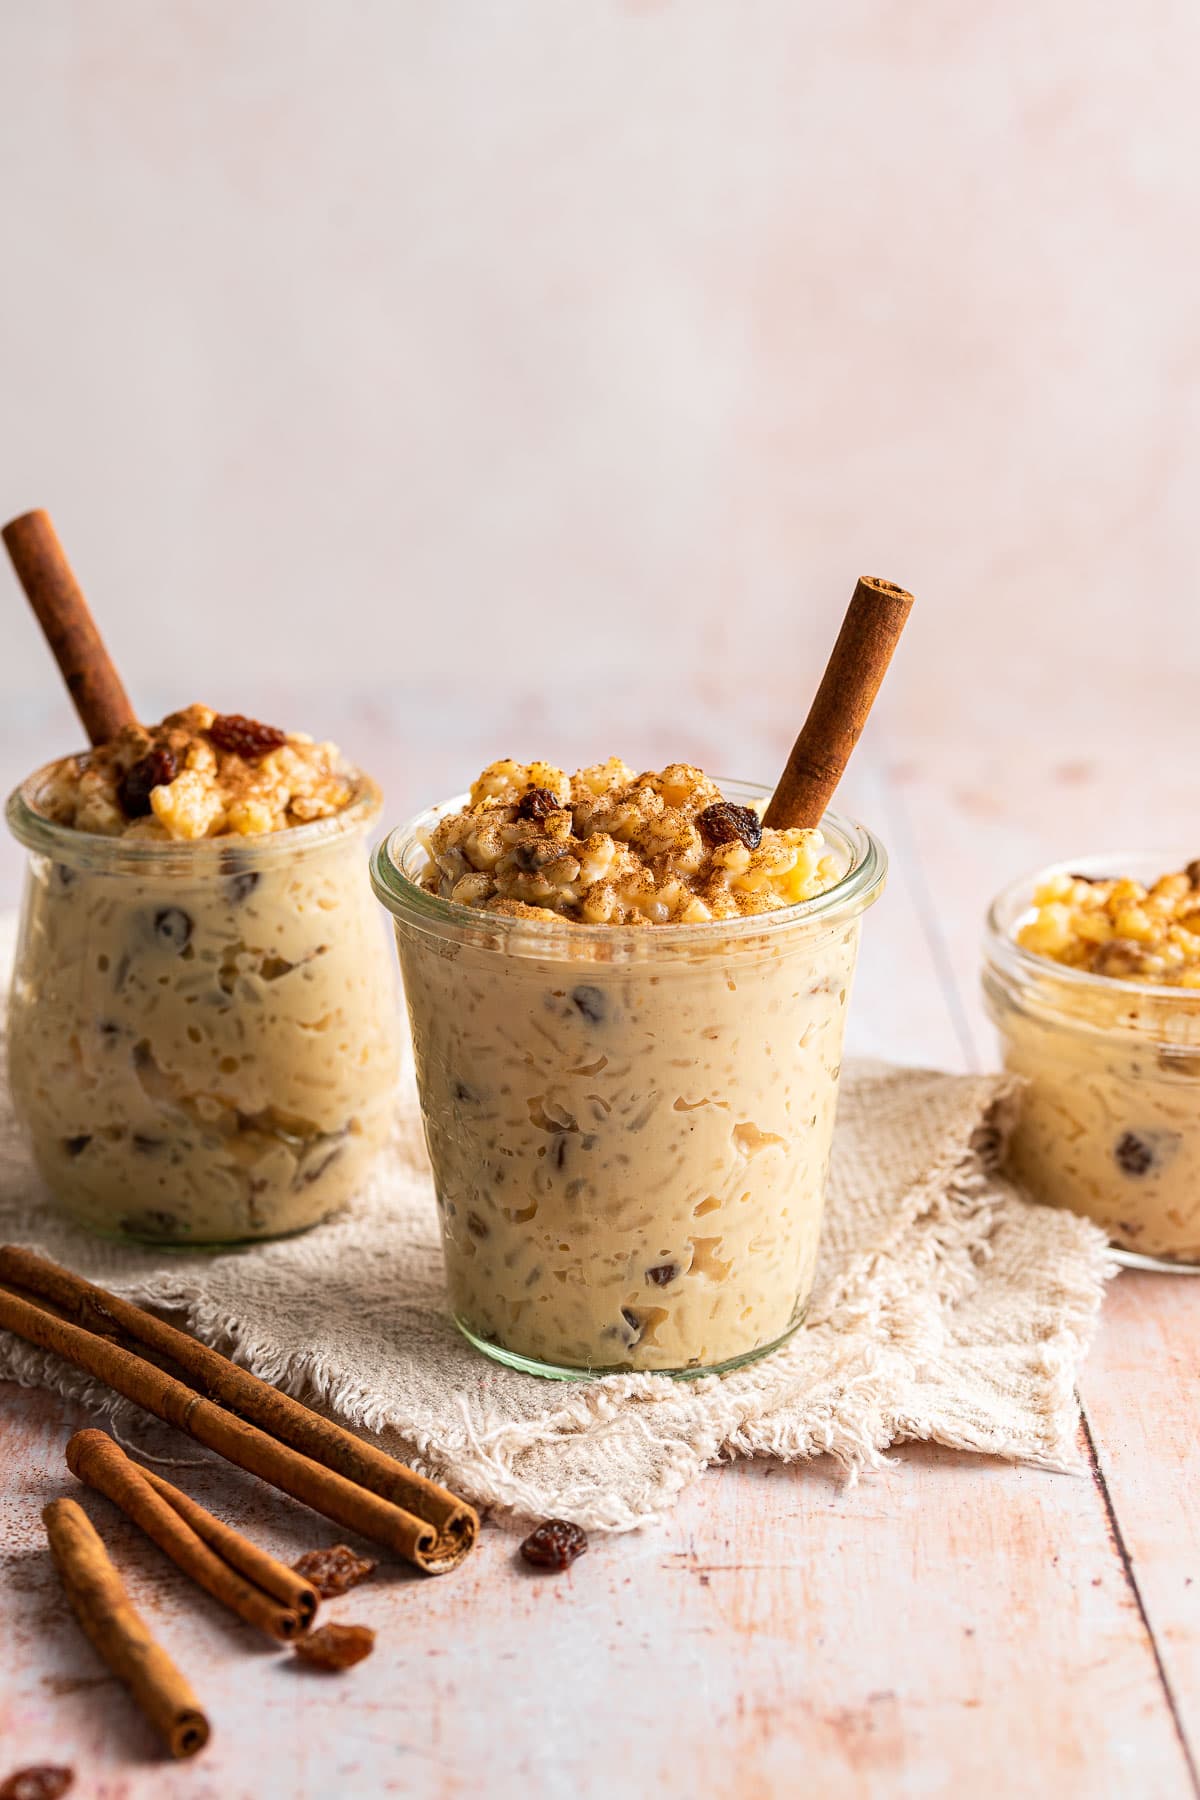 Arroz con Leche finished pudding in glass cup and jars with cinnamon stick